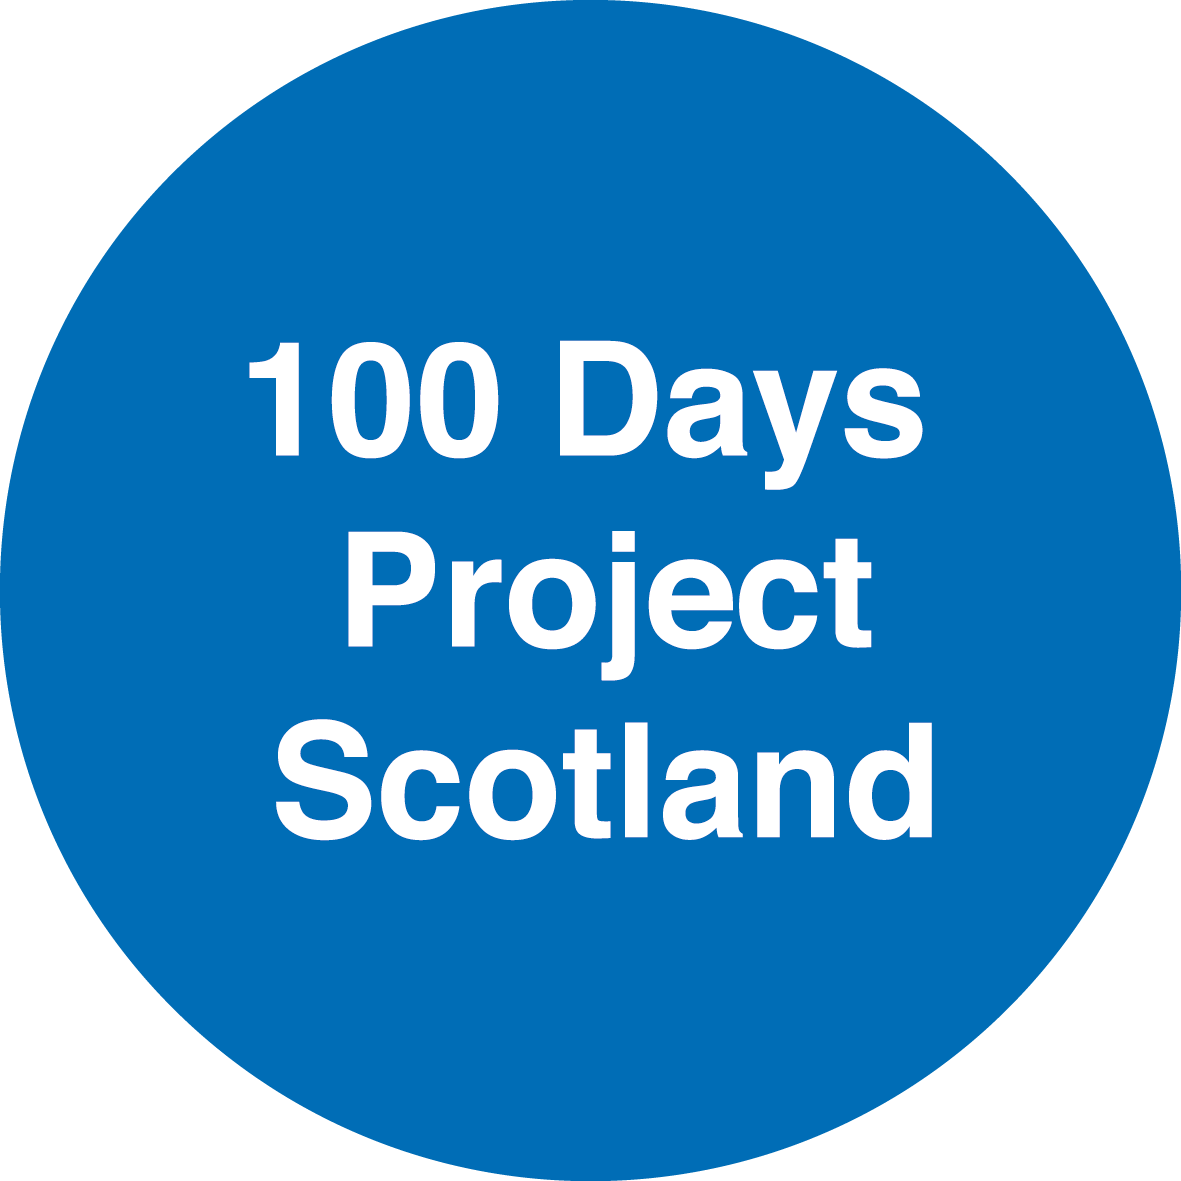 100 Days Project